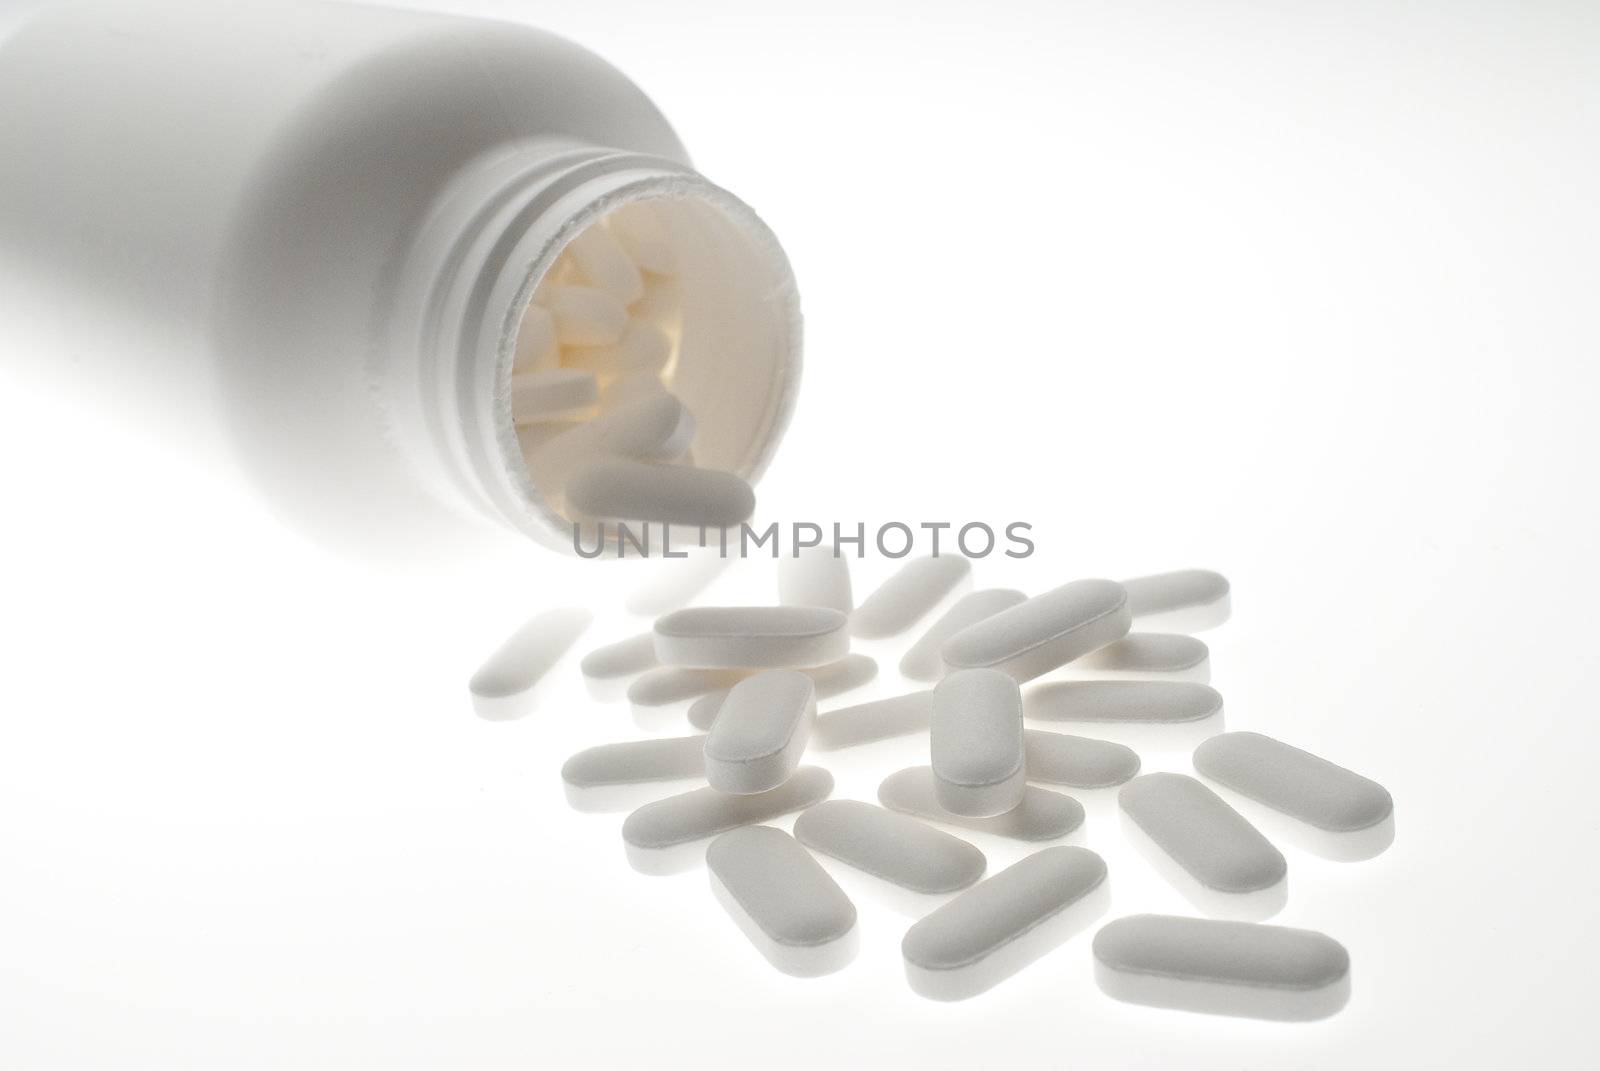 White pills and bottle by f/2sumicron